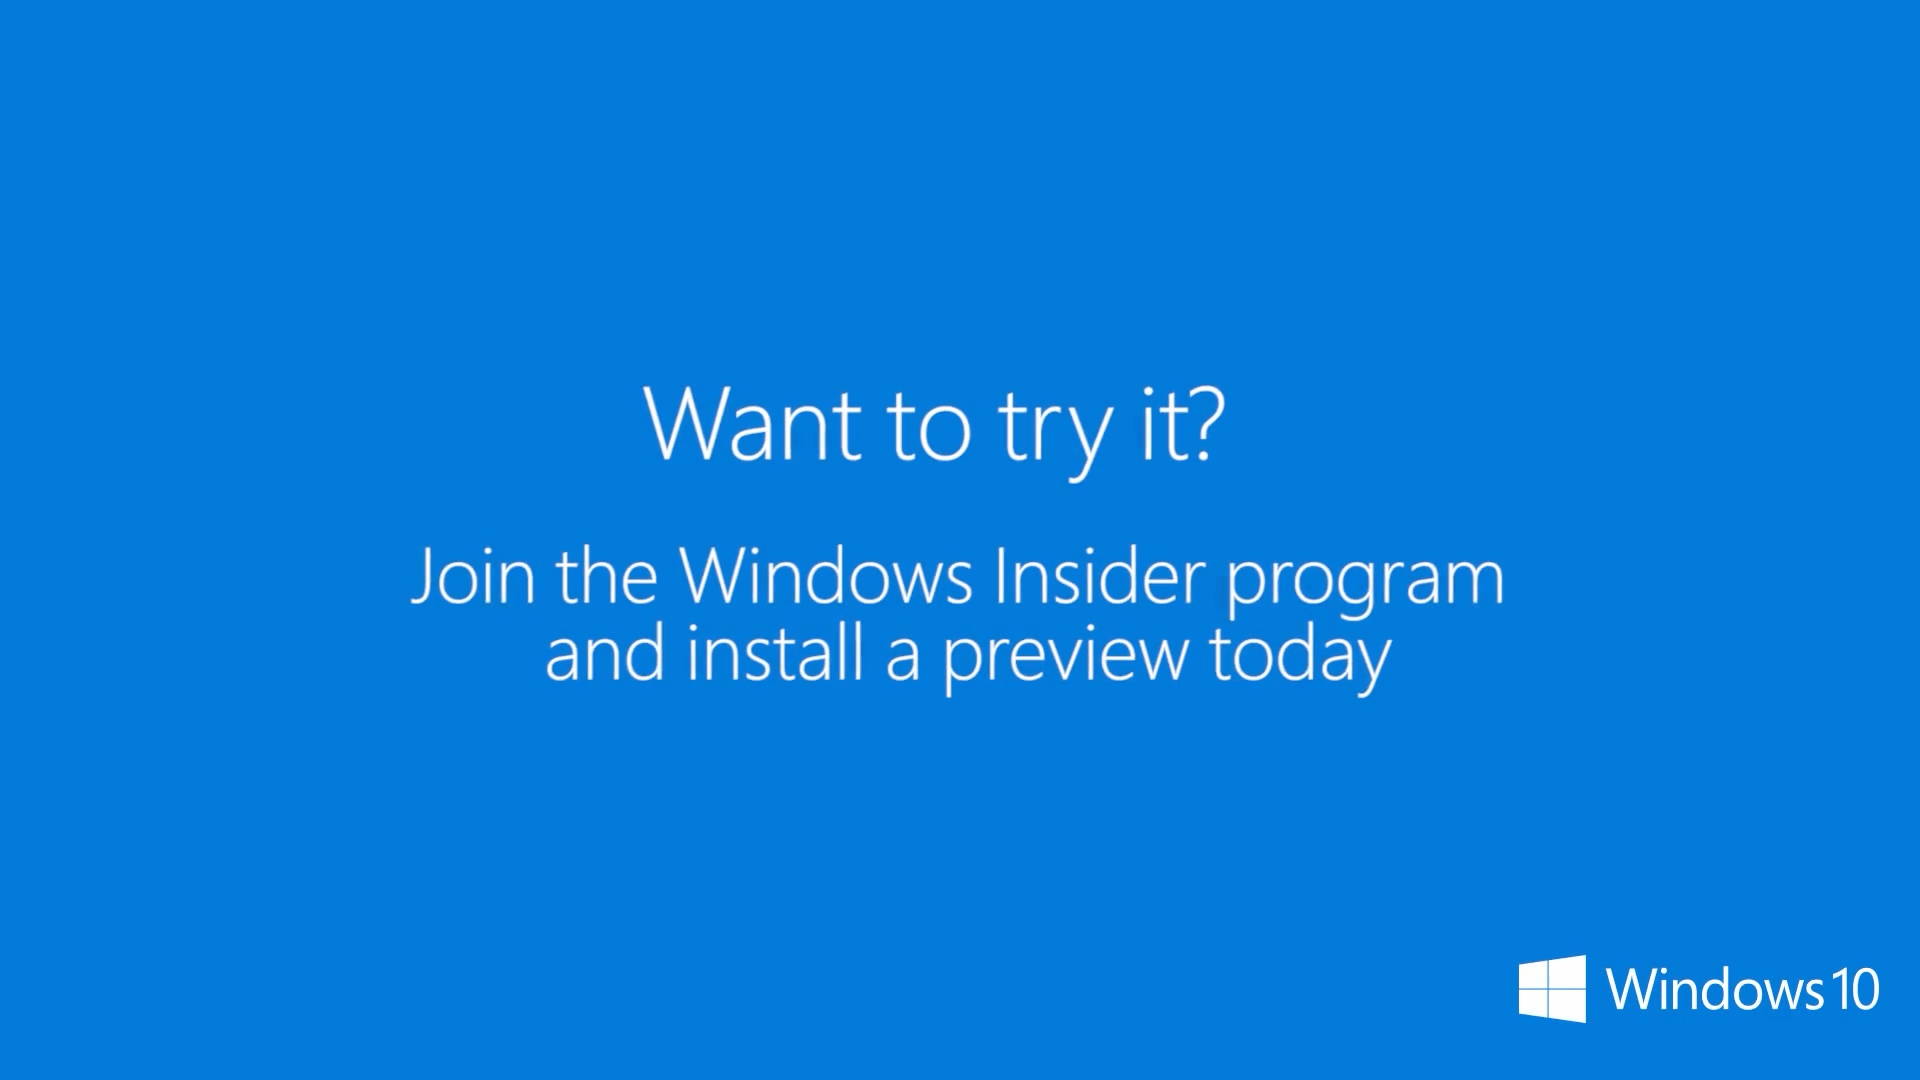 Windows 10 insider preview build 15031 - three new features introduced